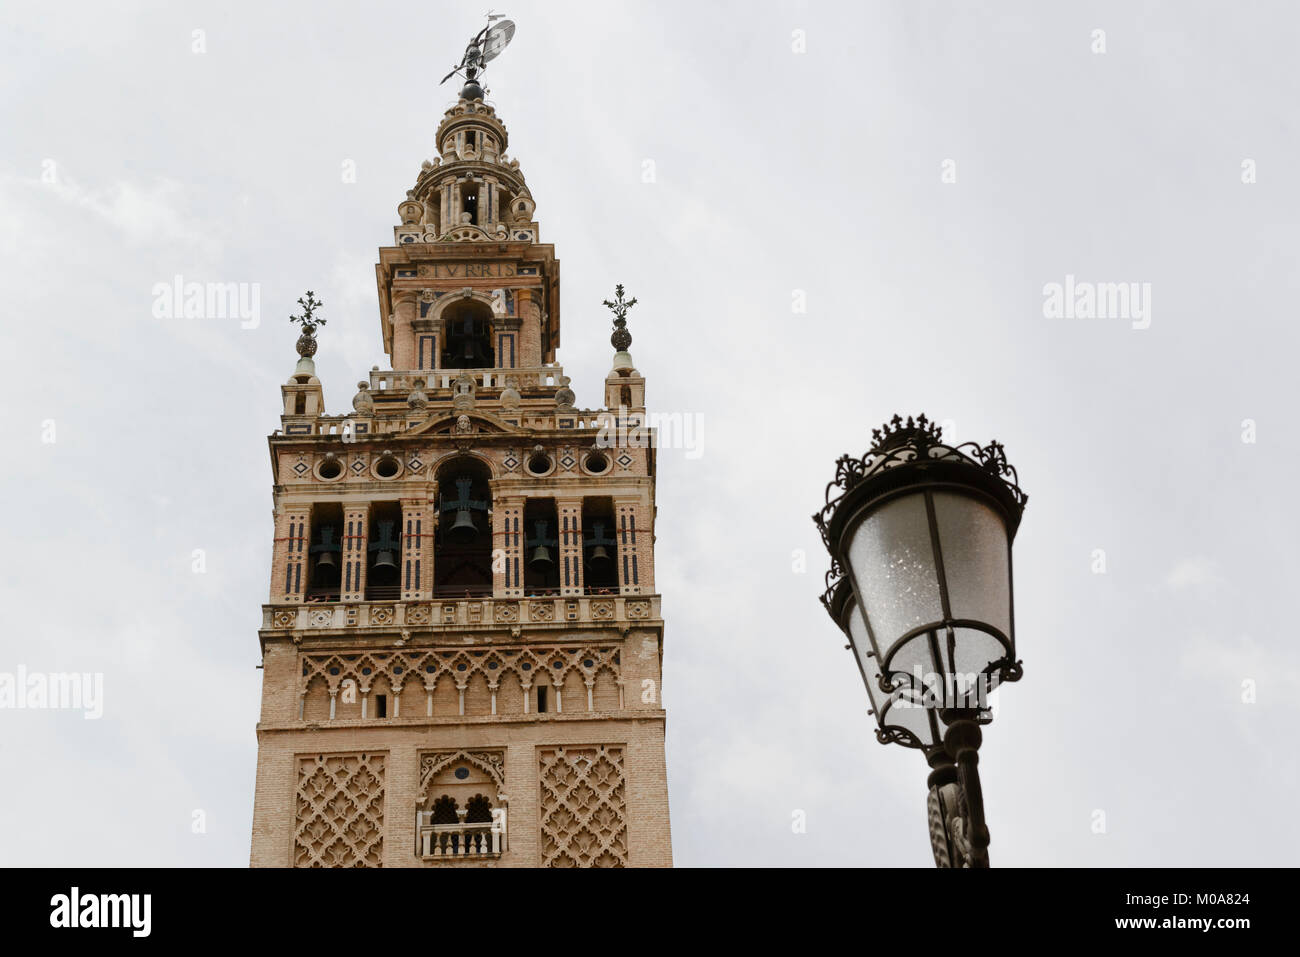 Seville, Andalusia, Spain. The Giralda. The bell tower of the Seville Cathedral. Stock Photo